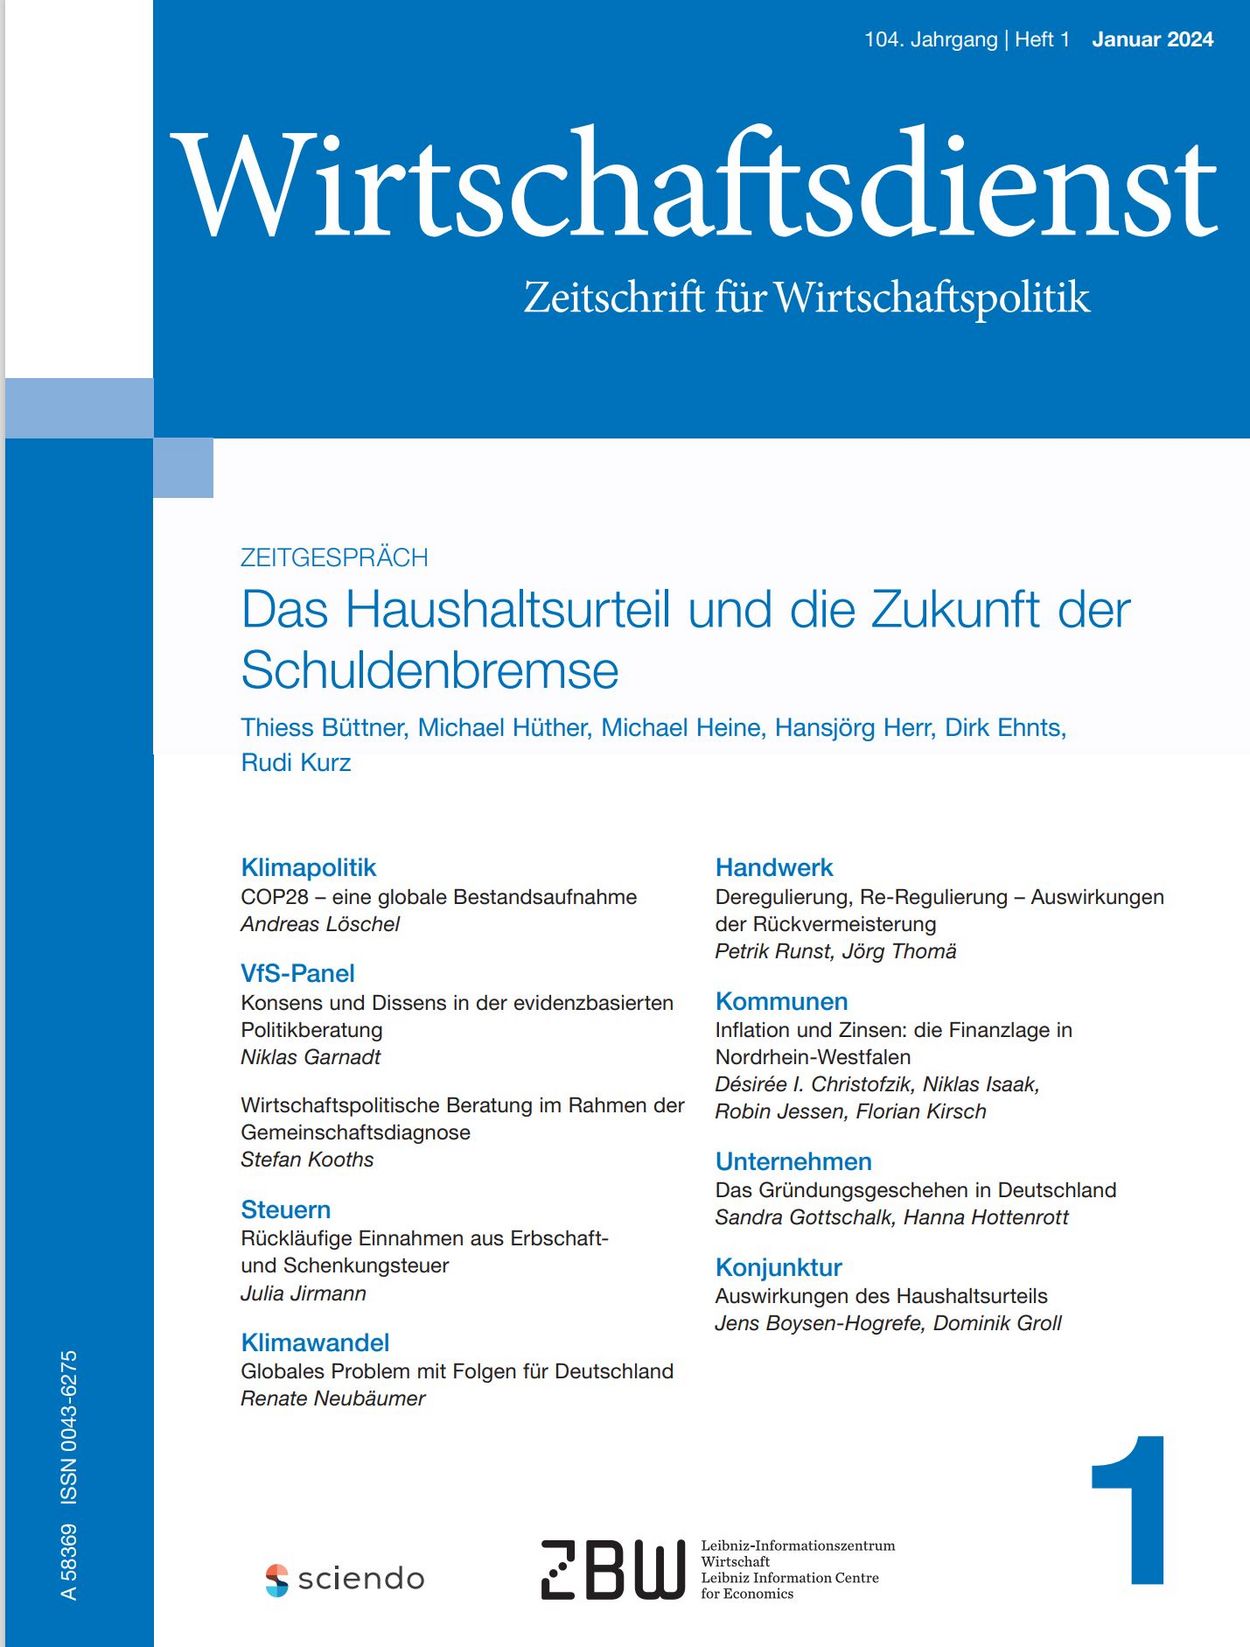 Cover page Wirtschaftsdienst issue 1, 2024. journal for economic policy.